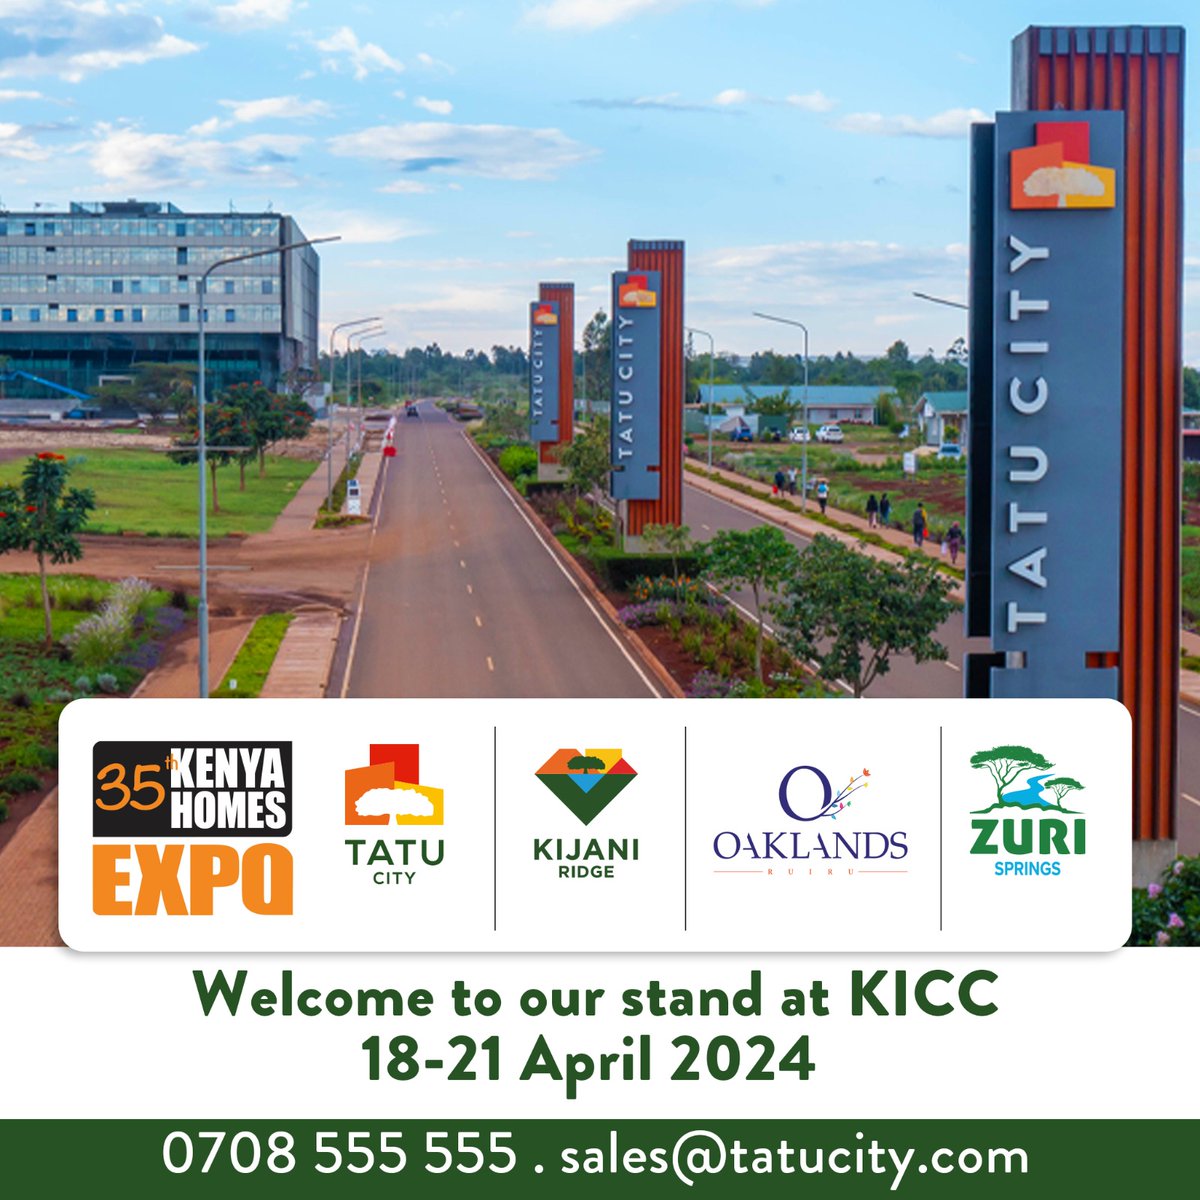 We're excited to announce that that @tatu_city  will be exhibiting at the #35thKenyaHomesExpo Get your advance ticket today at only 100ksh when you visit kenyahomesexpo.com #sustainableliving